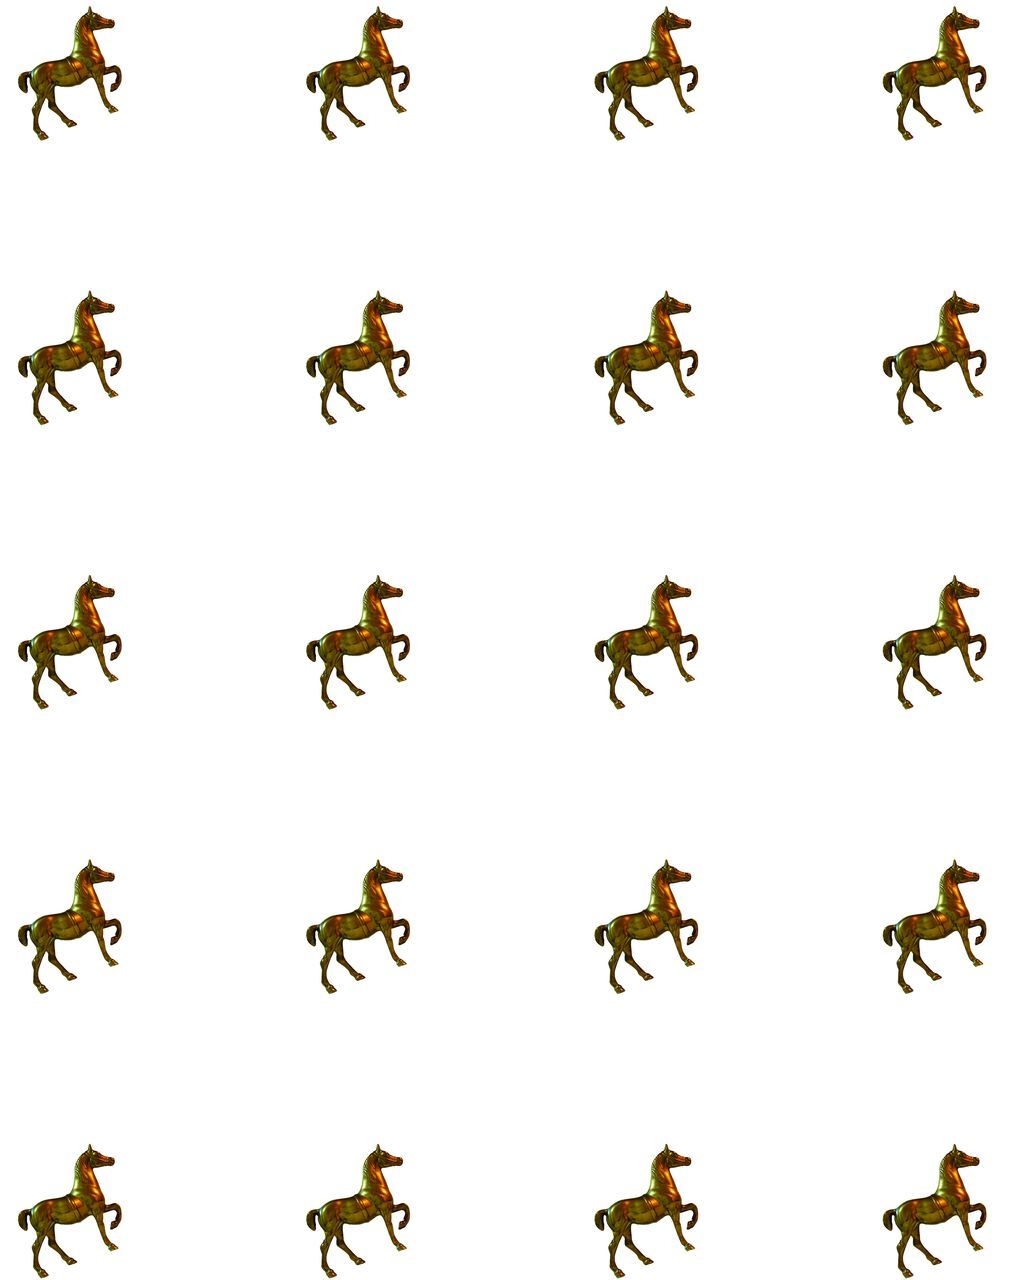 Horse Pattern Seamless Horses Background Vector Art Wild Animal Illustration Design Vintage Painting Isolated Running Race Wallpaper Flat Black Jump Equestrian Mustang Symbol Style Color Graphic Paper Silhouette Pony Farm Textile Mammal Wrapping Nature Texture White Decoration Beautiful Backdrop Embroidery Cartoon Fabric Stallion Mane Hooves Shoe Abstract Cute Flowers Speed